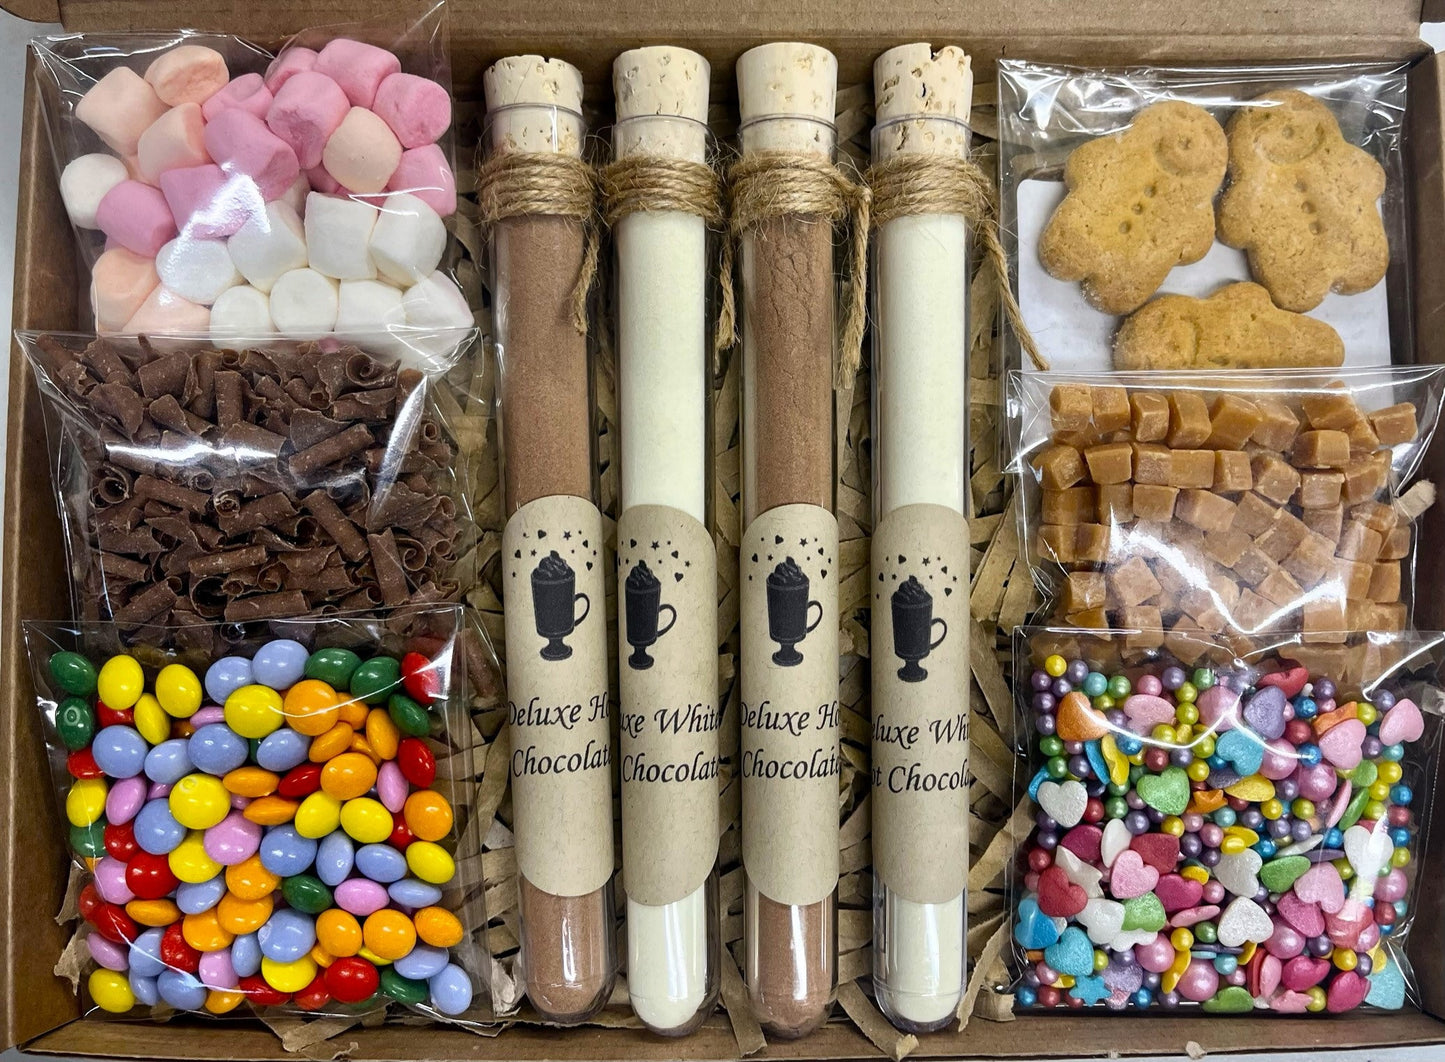 Unique Milk & White Hot Chocolate Letterbox Gift, Sprinkles and Toppings, Stocking Filler, Birthday, Unicorn, Chocolate Hamper, Christmas!